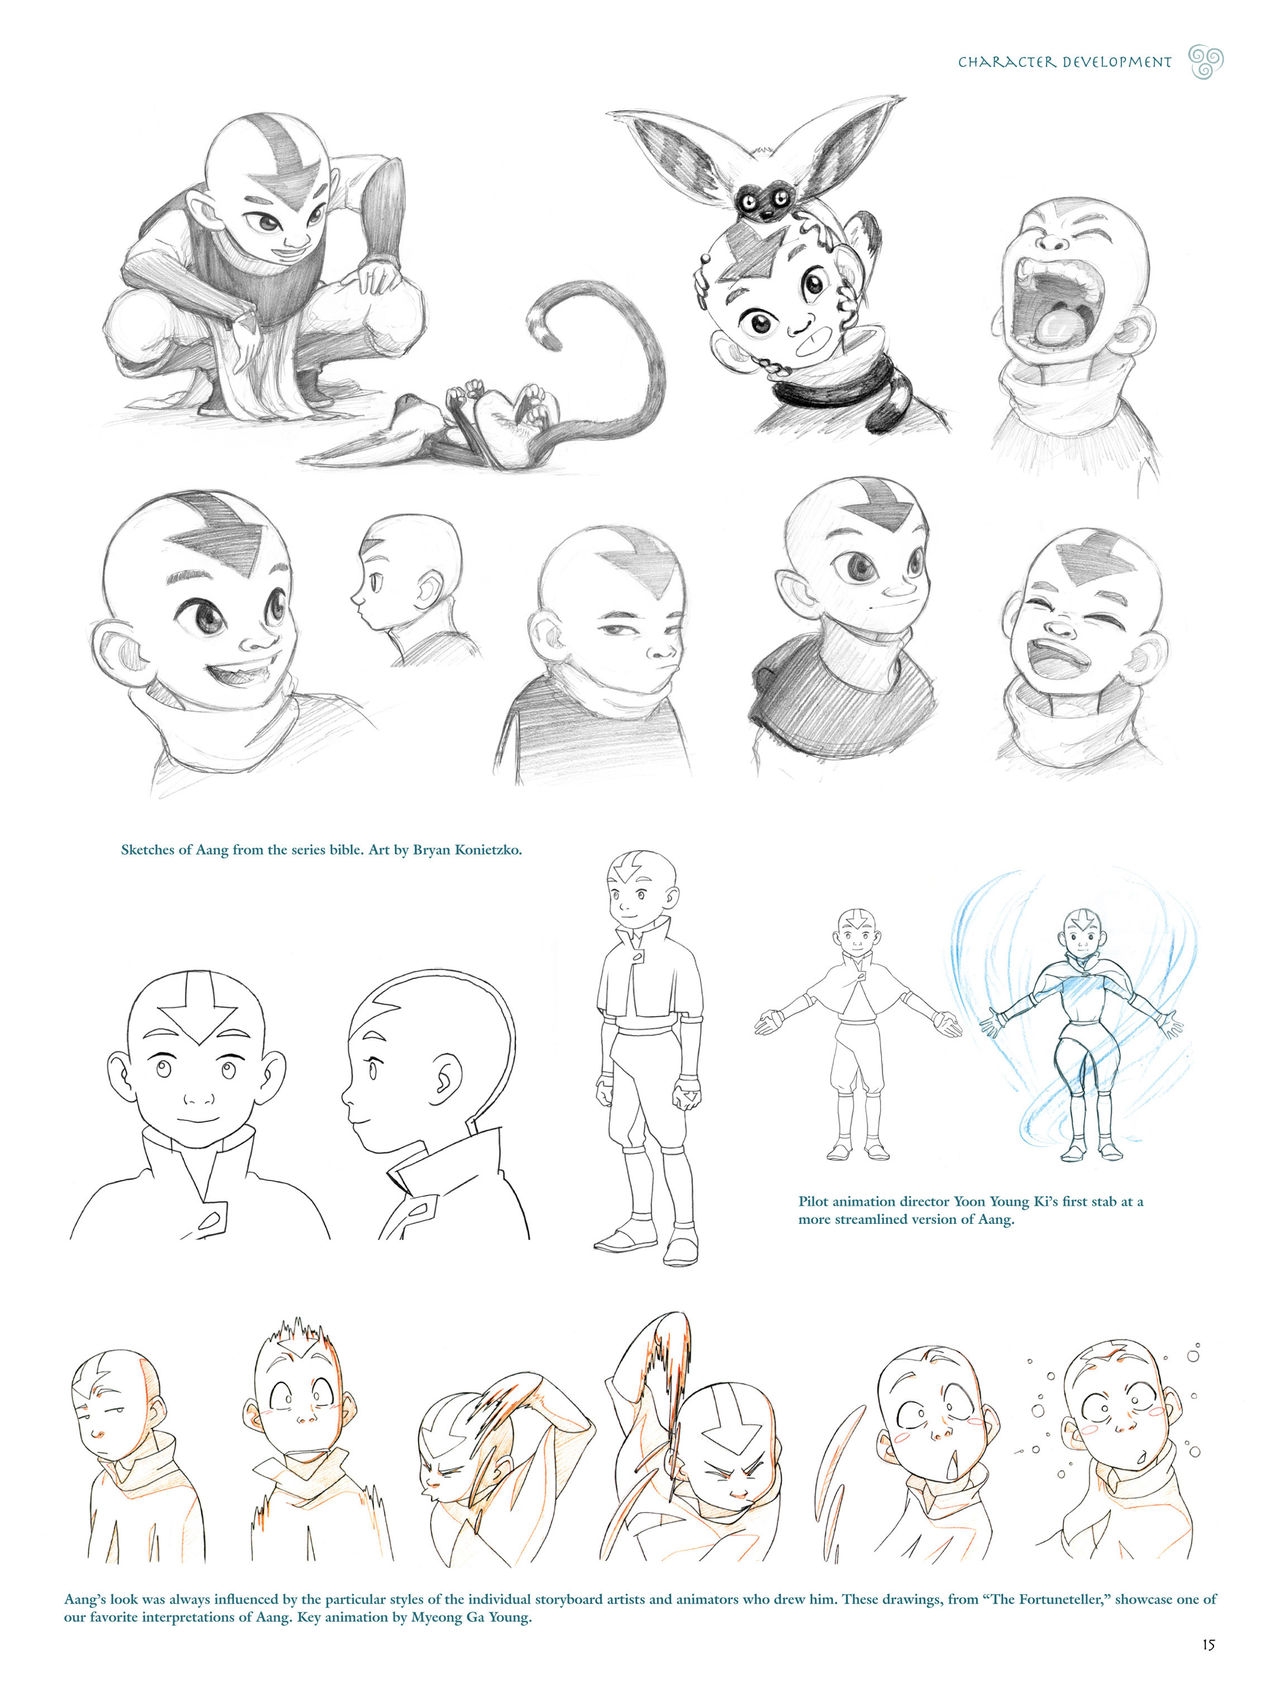 Avatar - The Last Airbender - The Art of the Animated Series 17